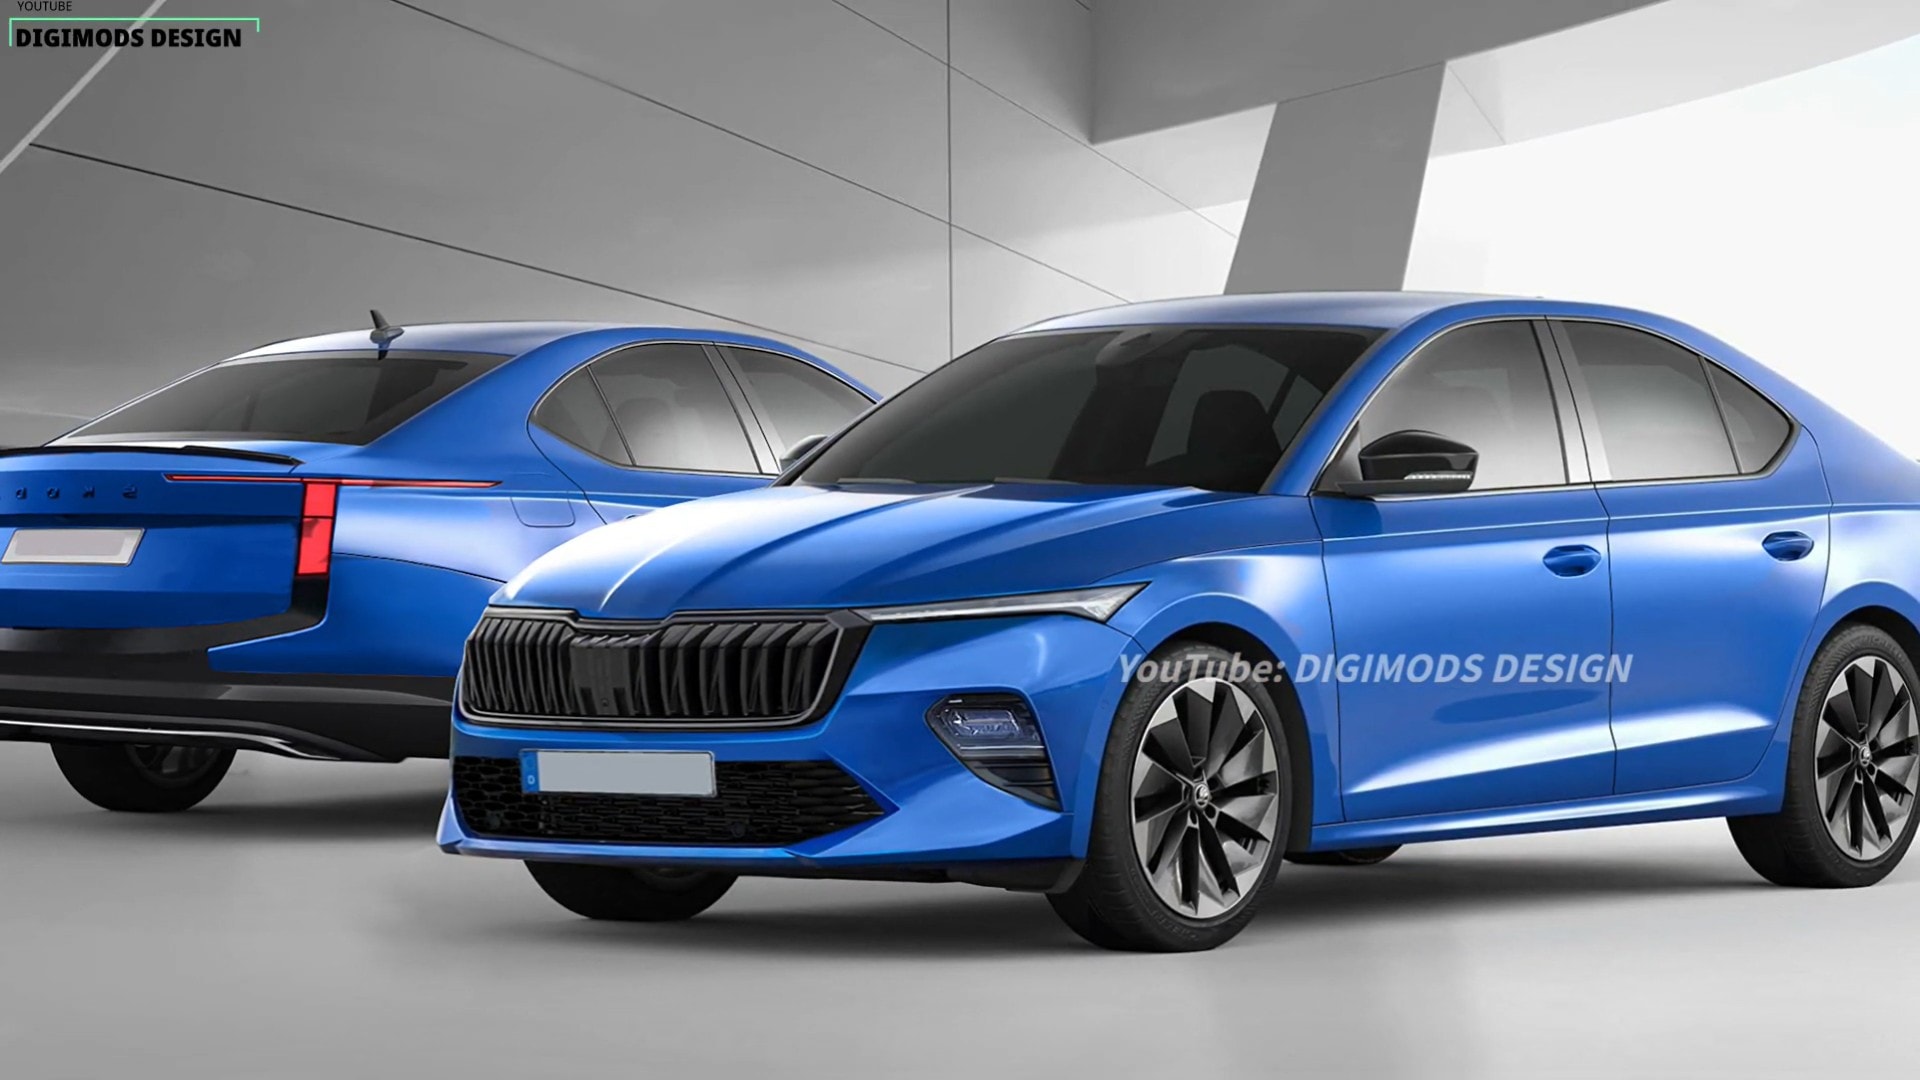 https://s1.cdn.autoevolution.com/images/news/all-new-fourth-gen-skoda-superb-reveals-its-roomy-silhouette-way-ahead-of-due-time-217574_1.jpg